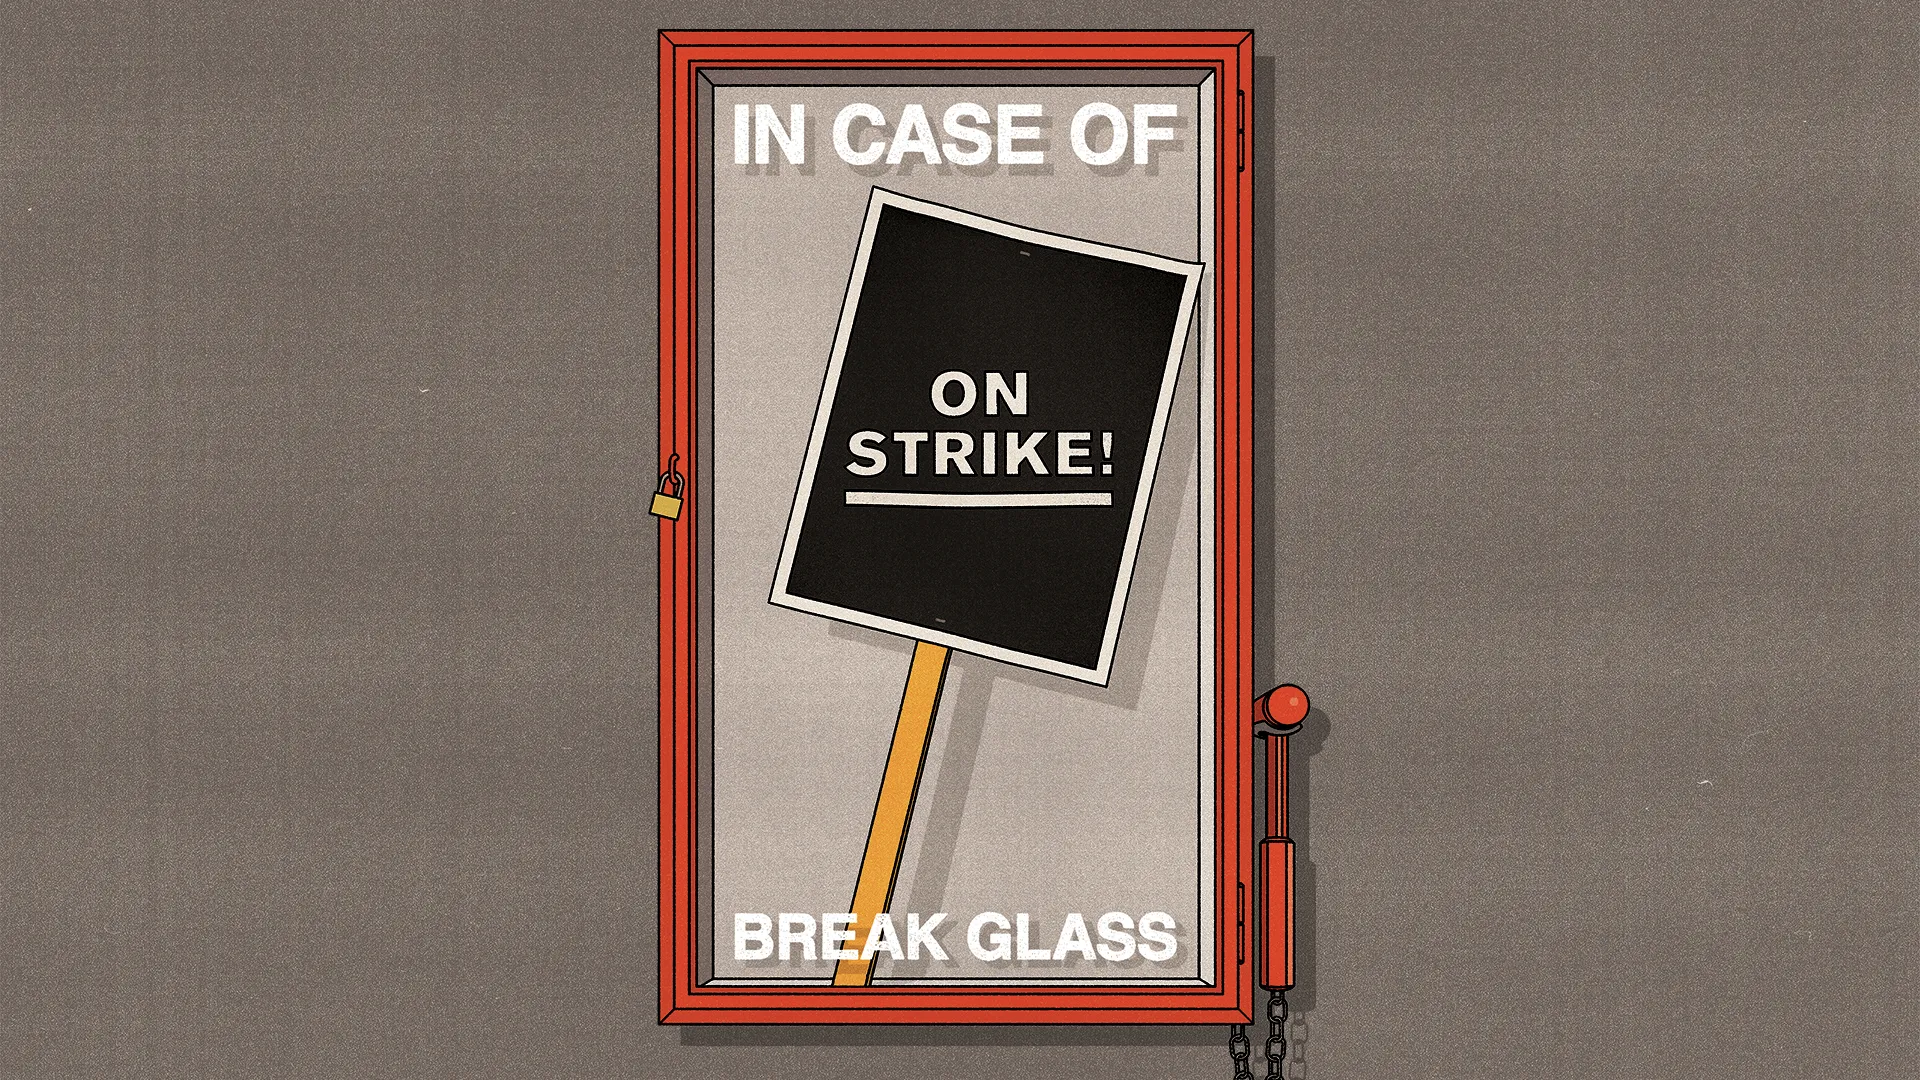 Illustration of picket sign behind glass that says "In Case of ON STRIKE! Break Glass"